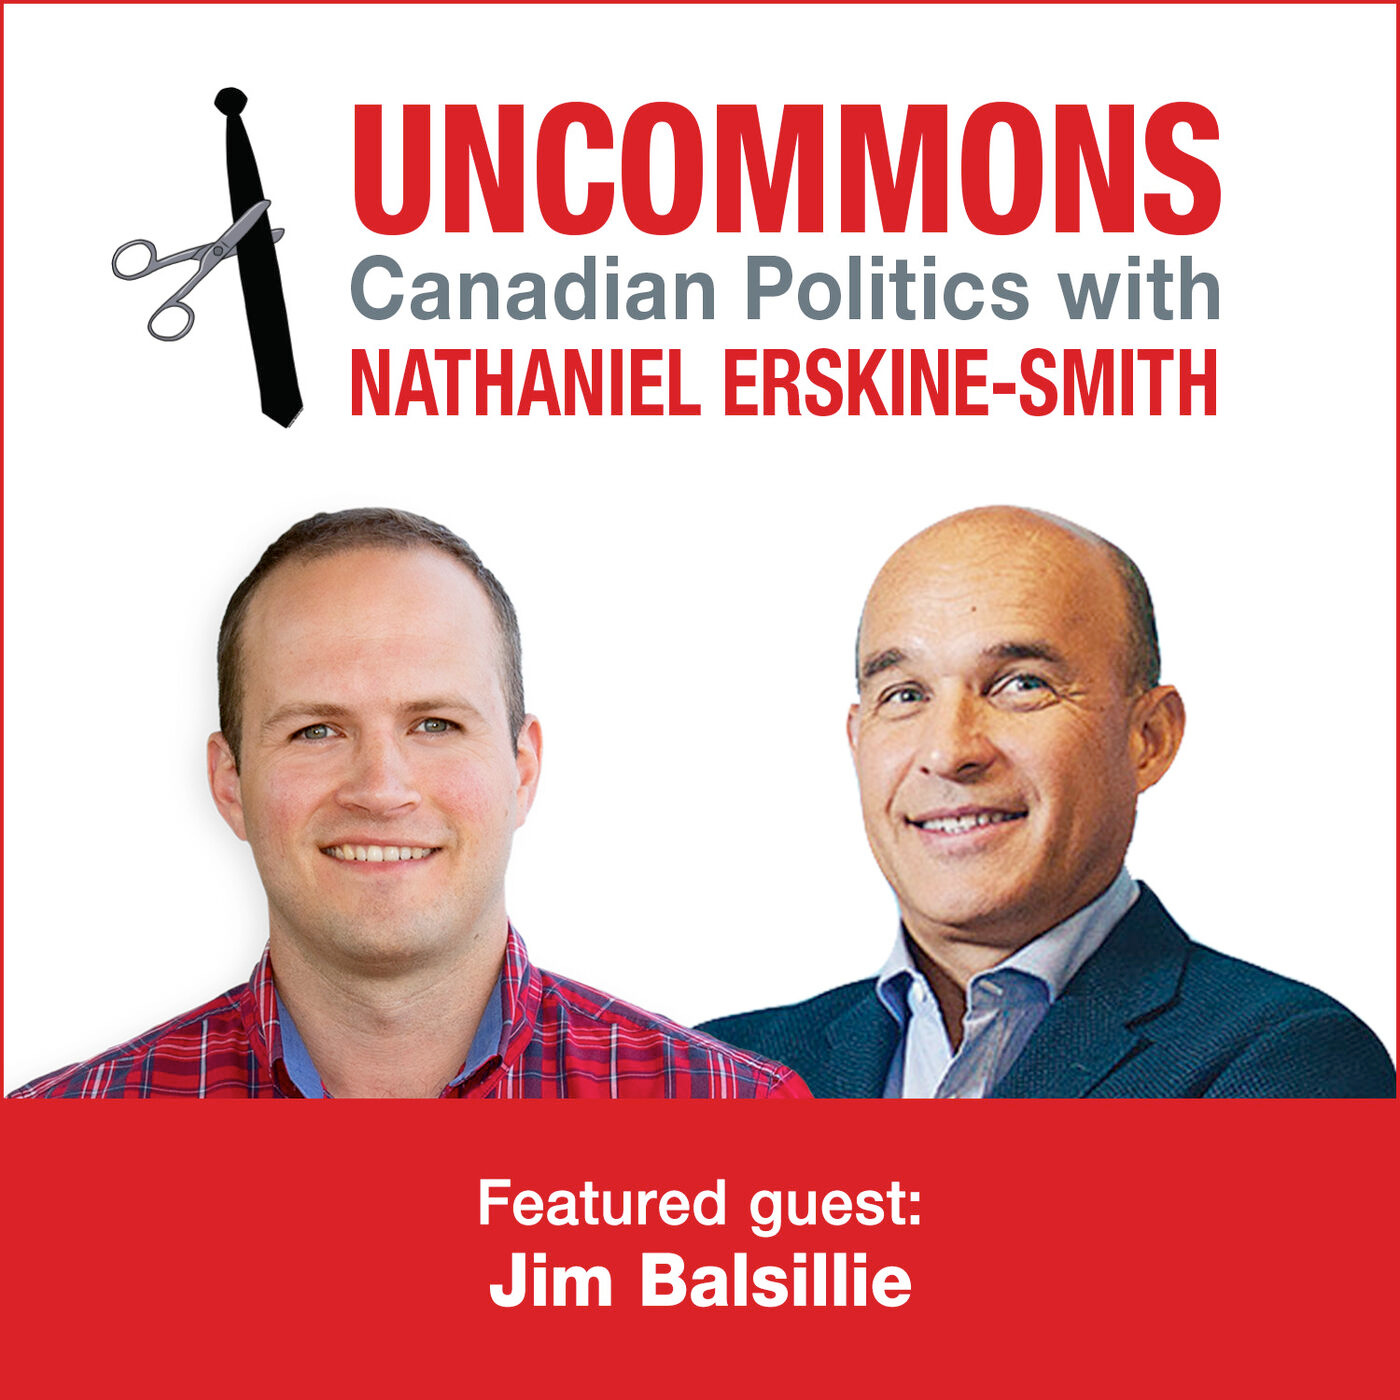 Innovation, IP, and data with Jim Balsillie